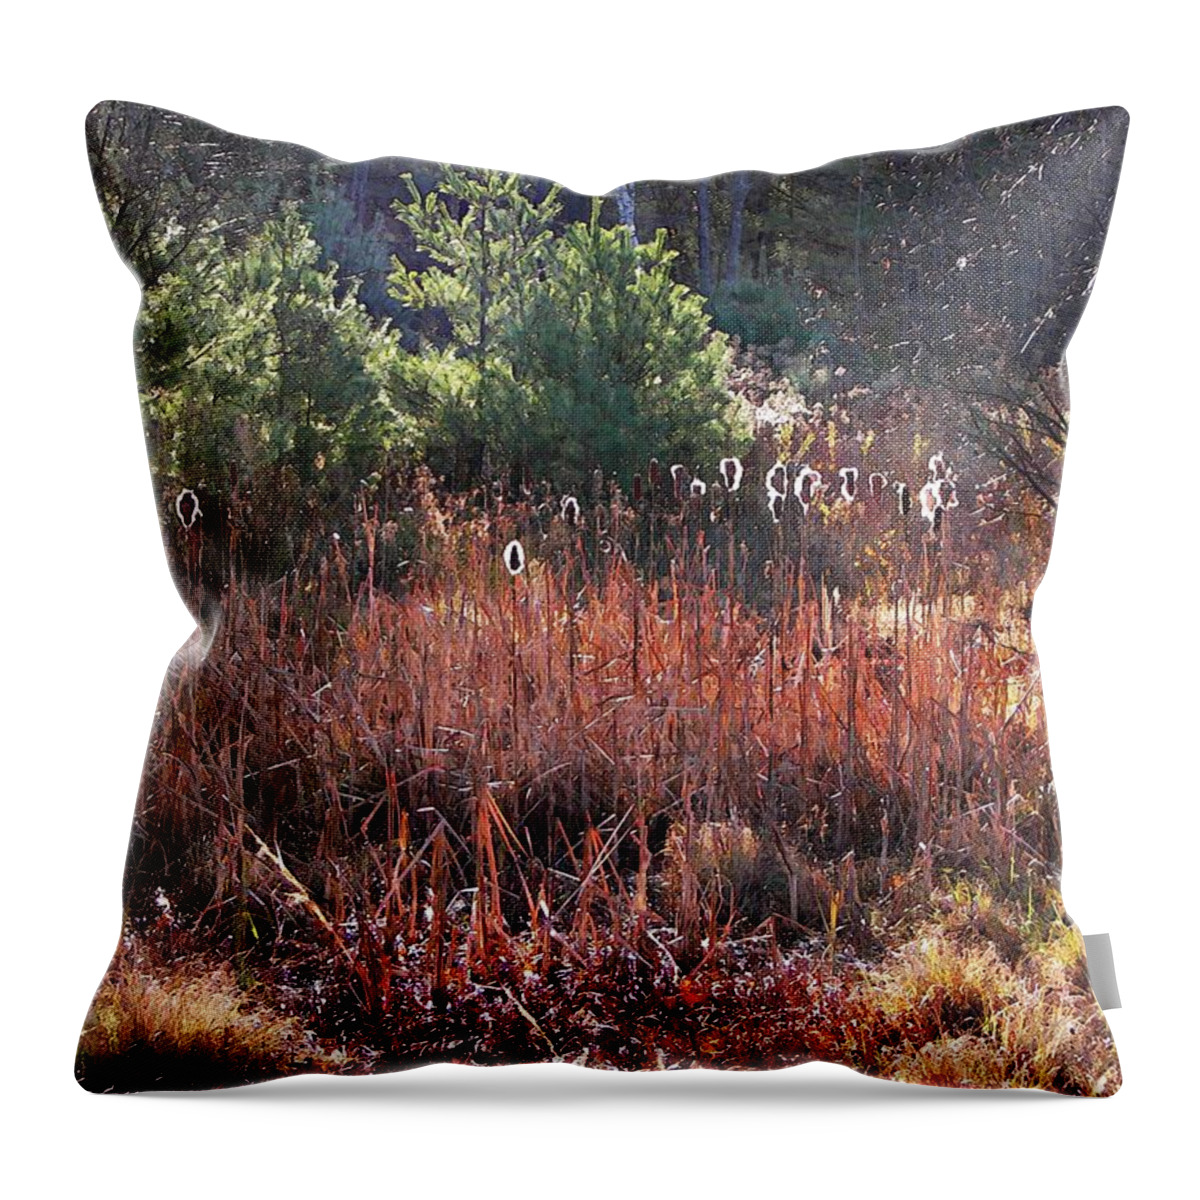 Shimmering Sunlight On The Cattails Throw Pillow featuring the photograph Shimmering Sunlight On The Cattails by Joy Nichols